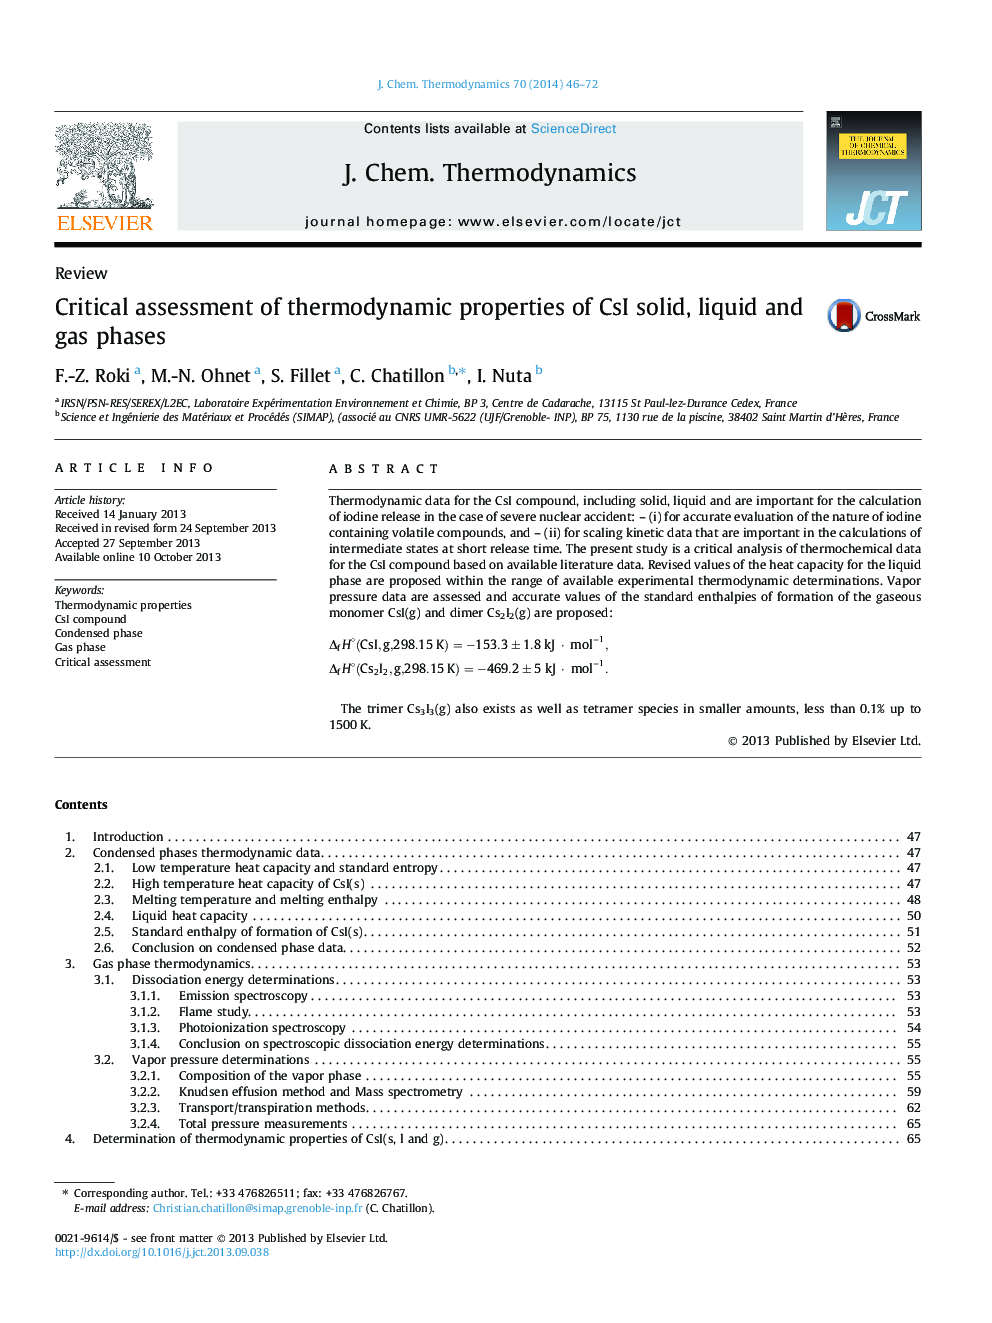 Critical assessment of thermodynamic properties of CsI solid, liquid and gas phases